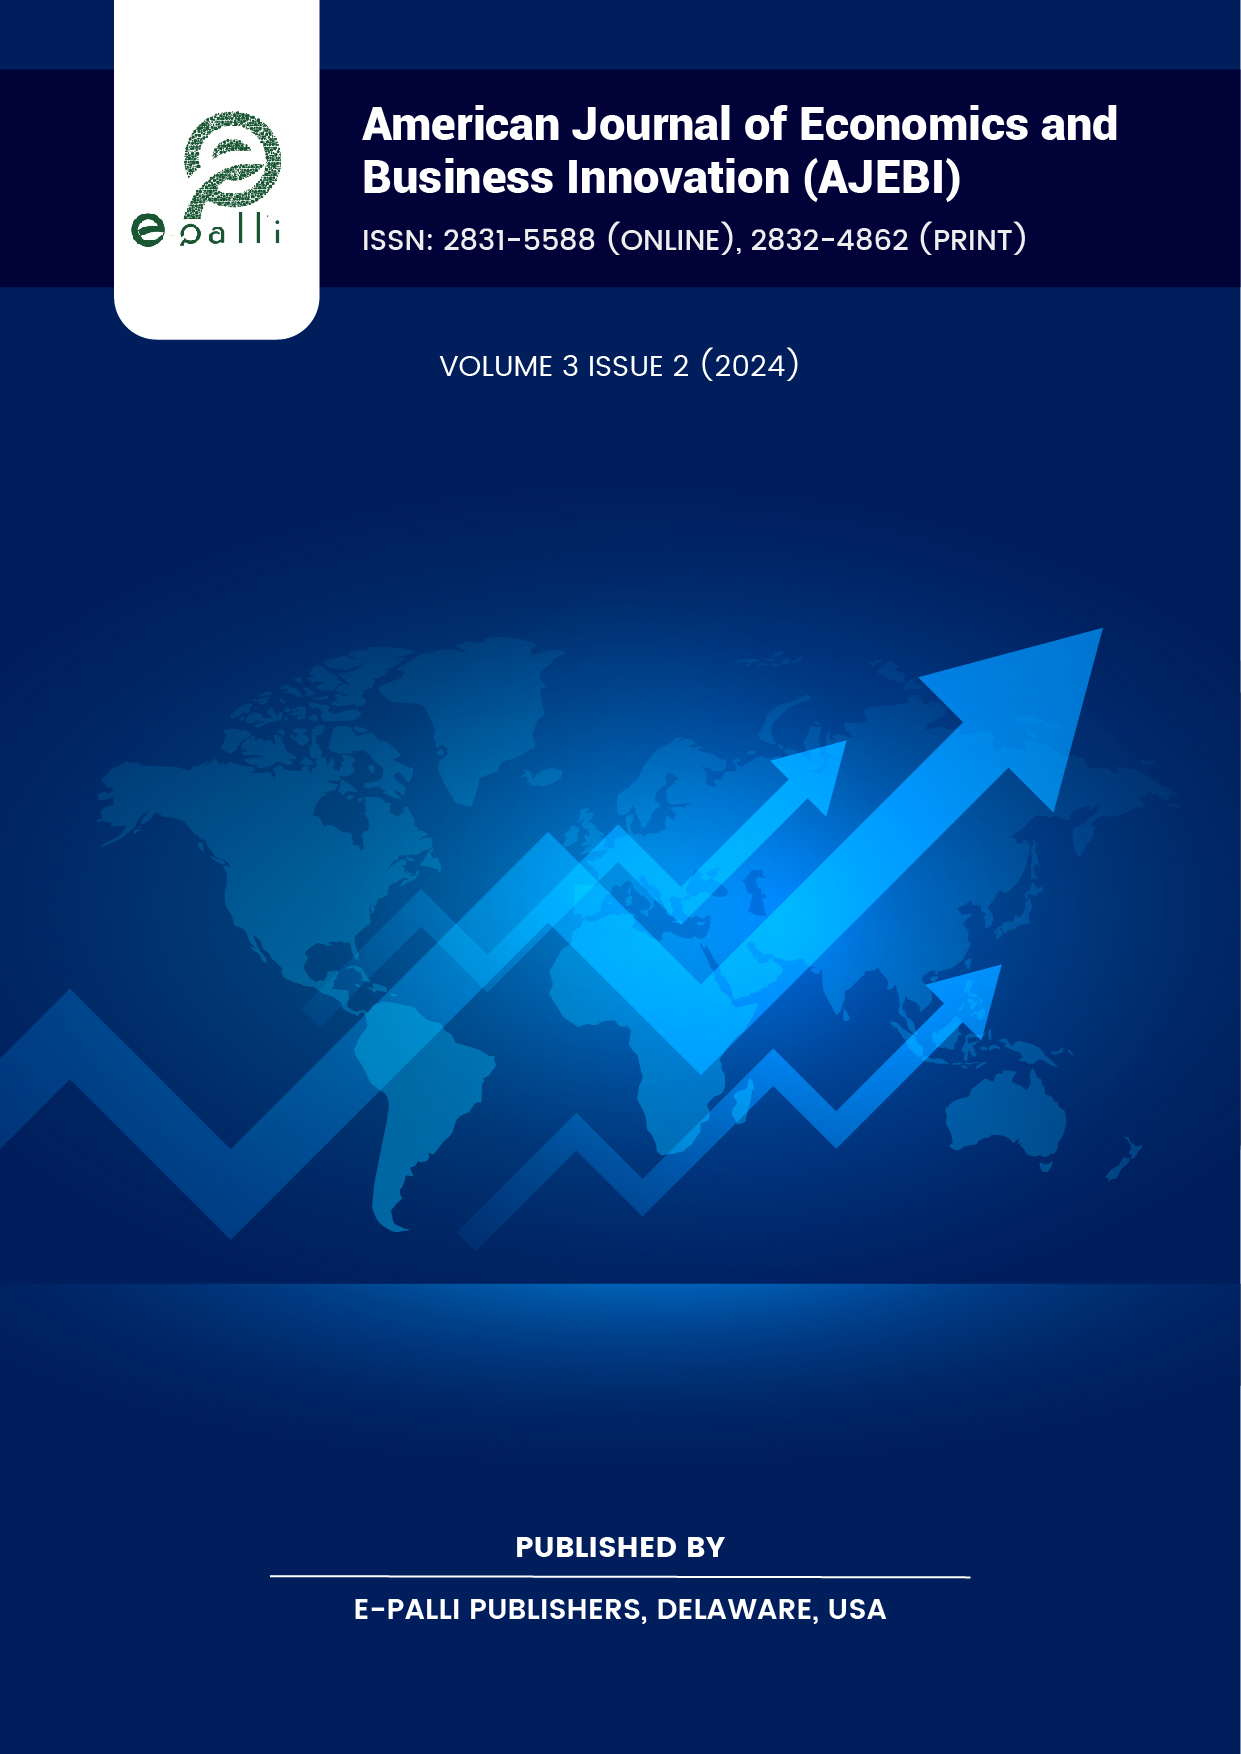                     View Vol. 3 No. 2 (2024): American Journal of Economics and Business Innovation
                